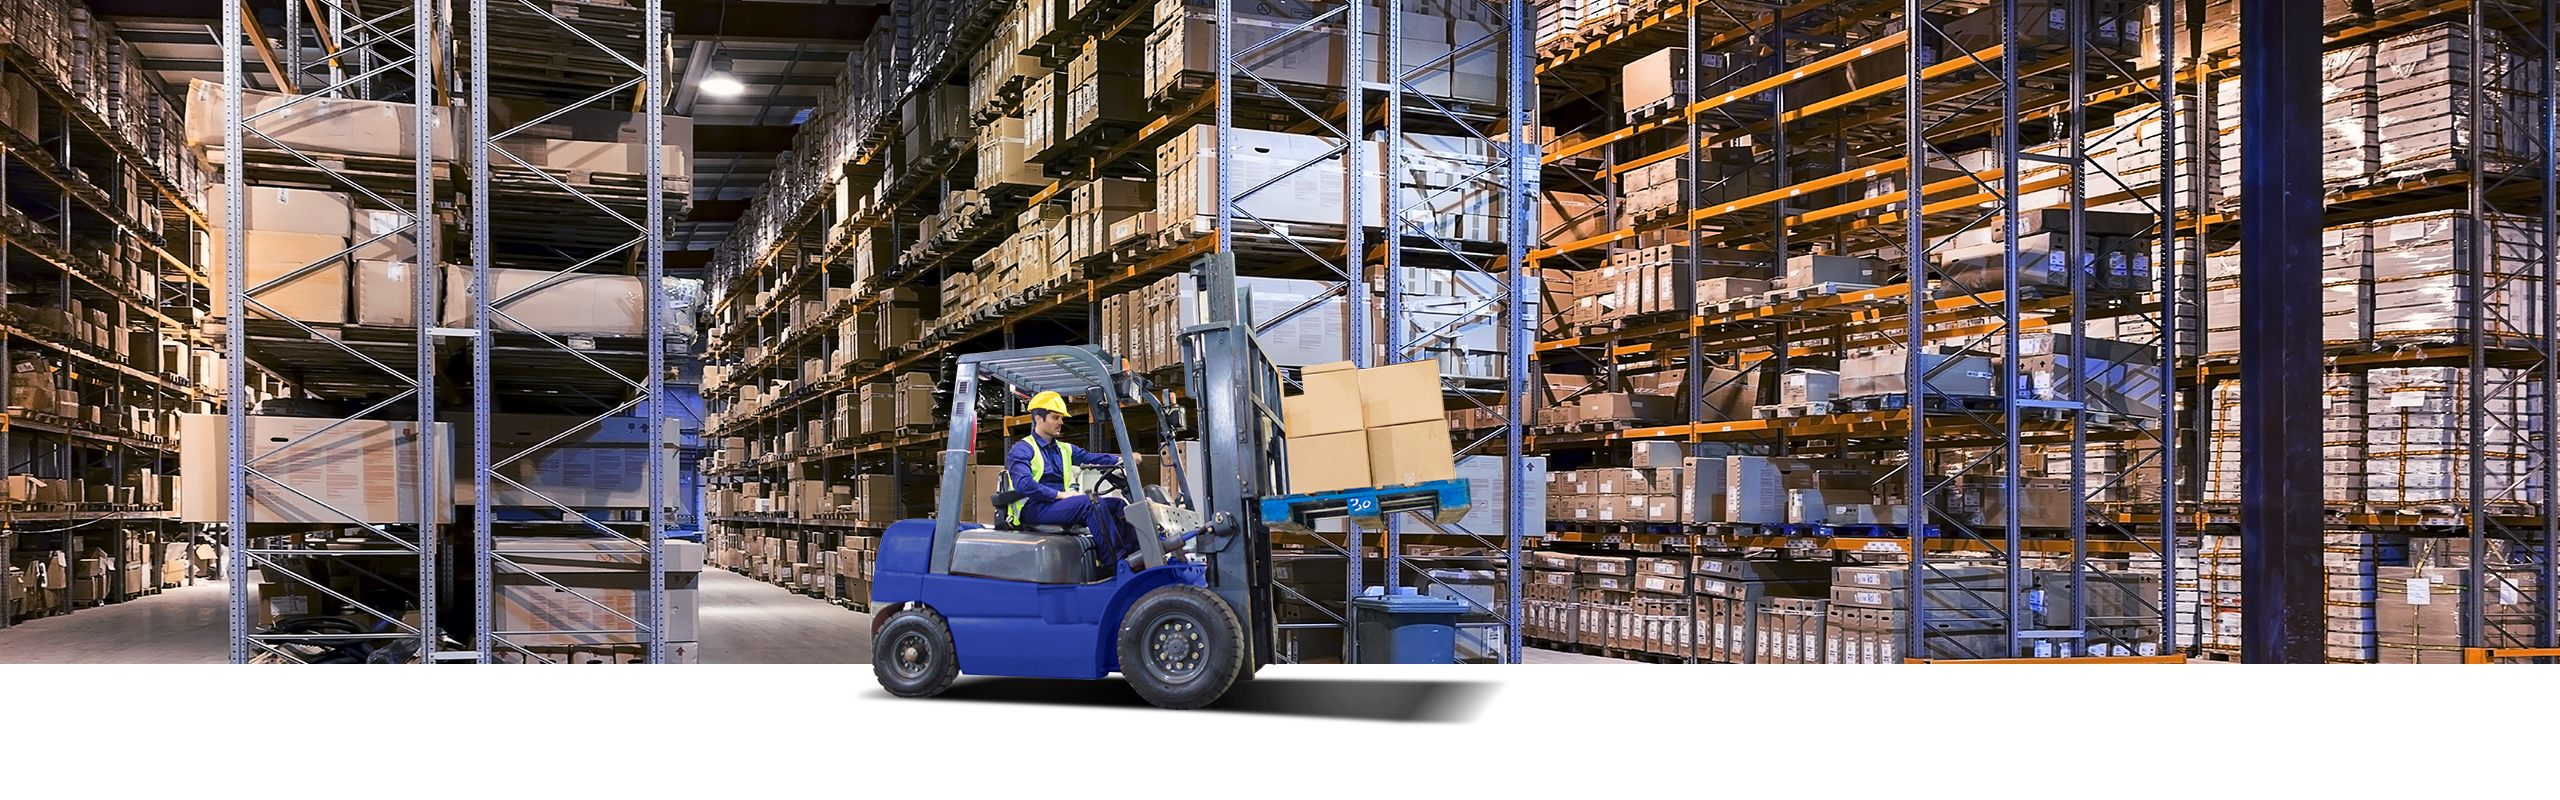 Dynevor Express forklift moving freight in a warehouse